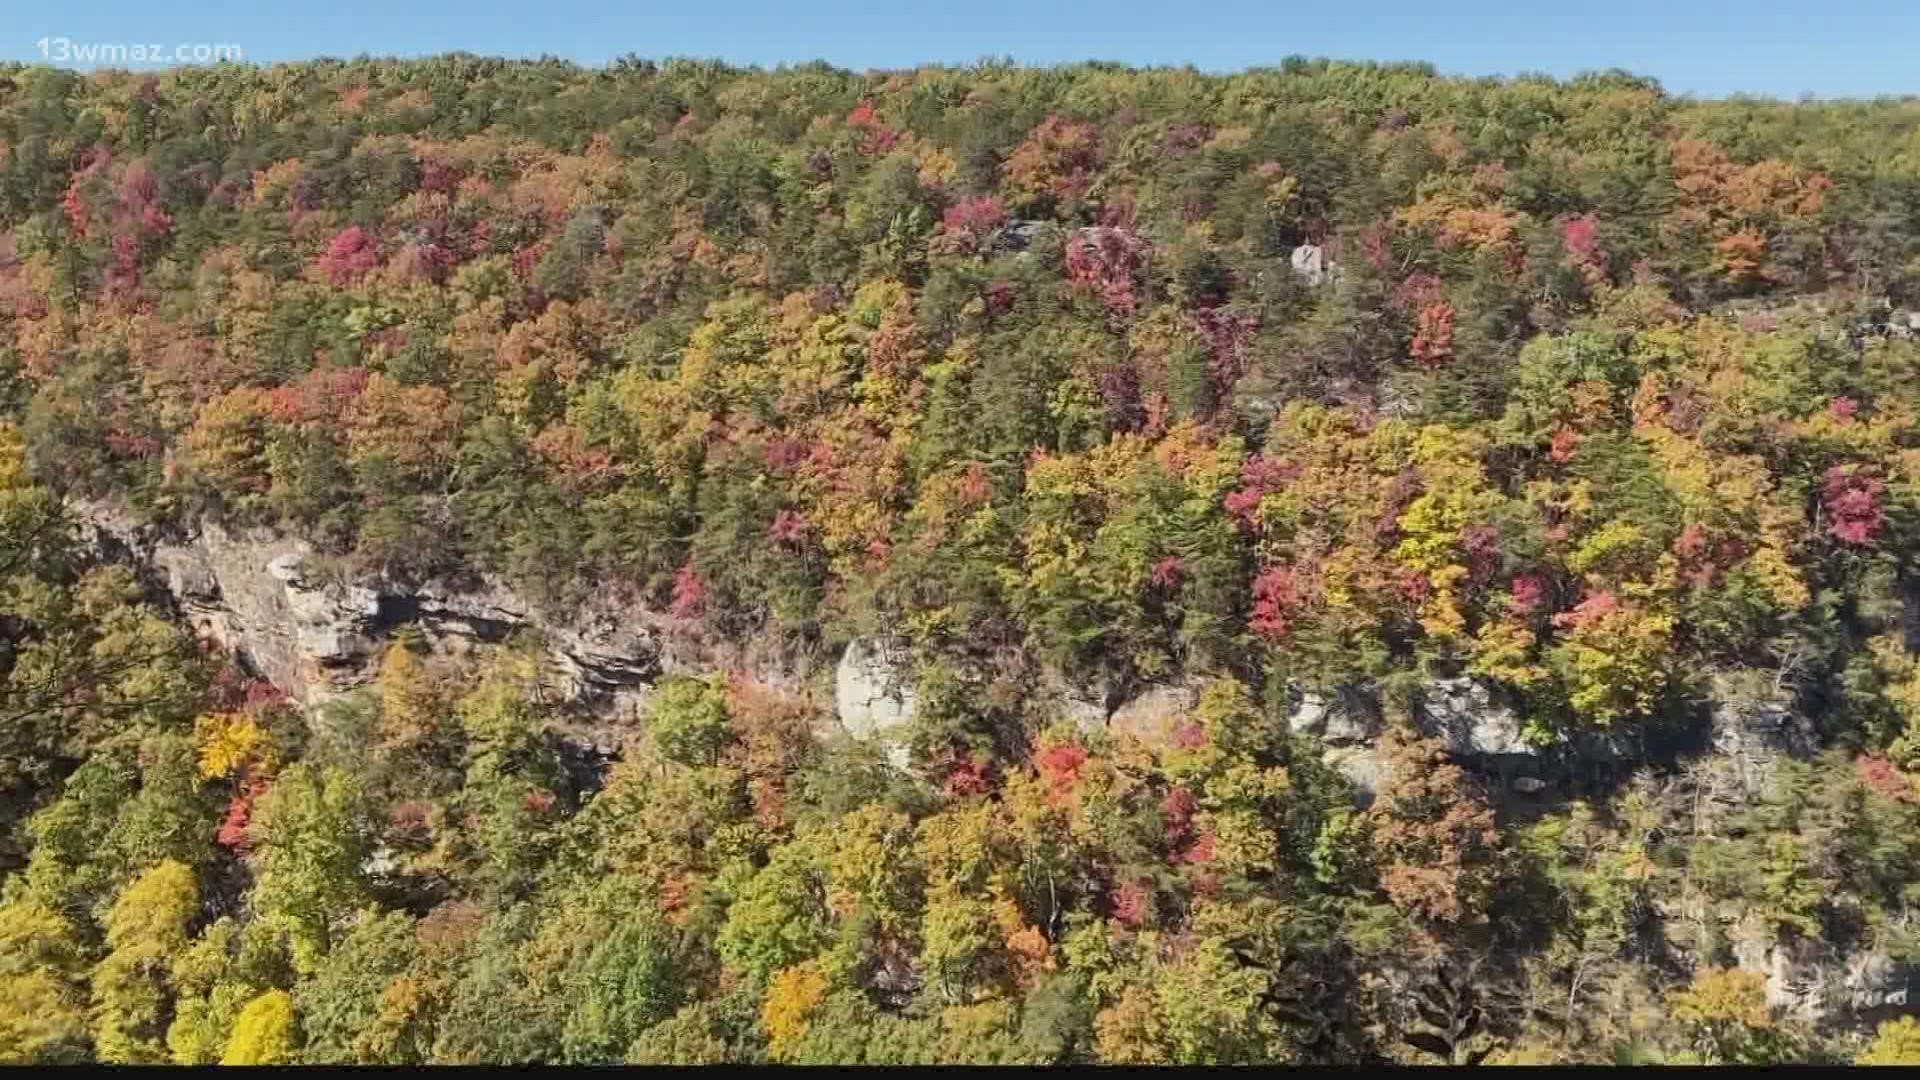 The state park has more than 400,000 visitors a year as people come from all around to take in the fall foliage.